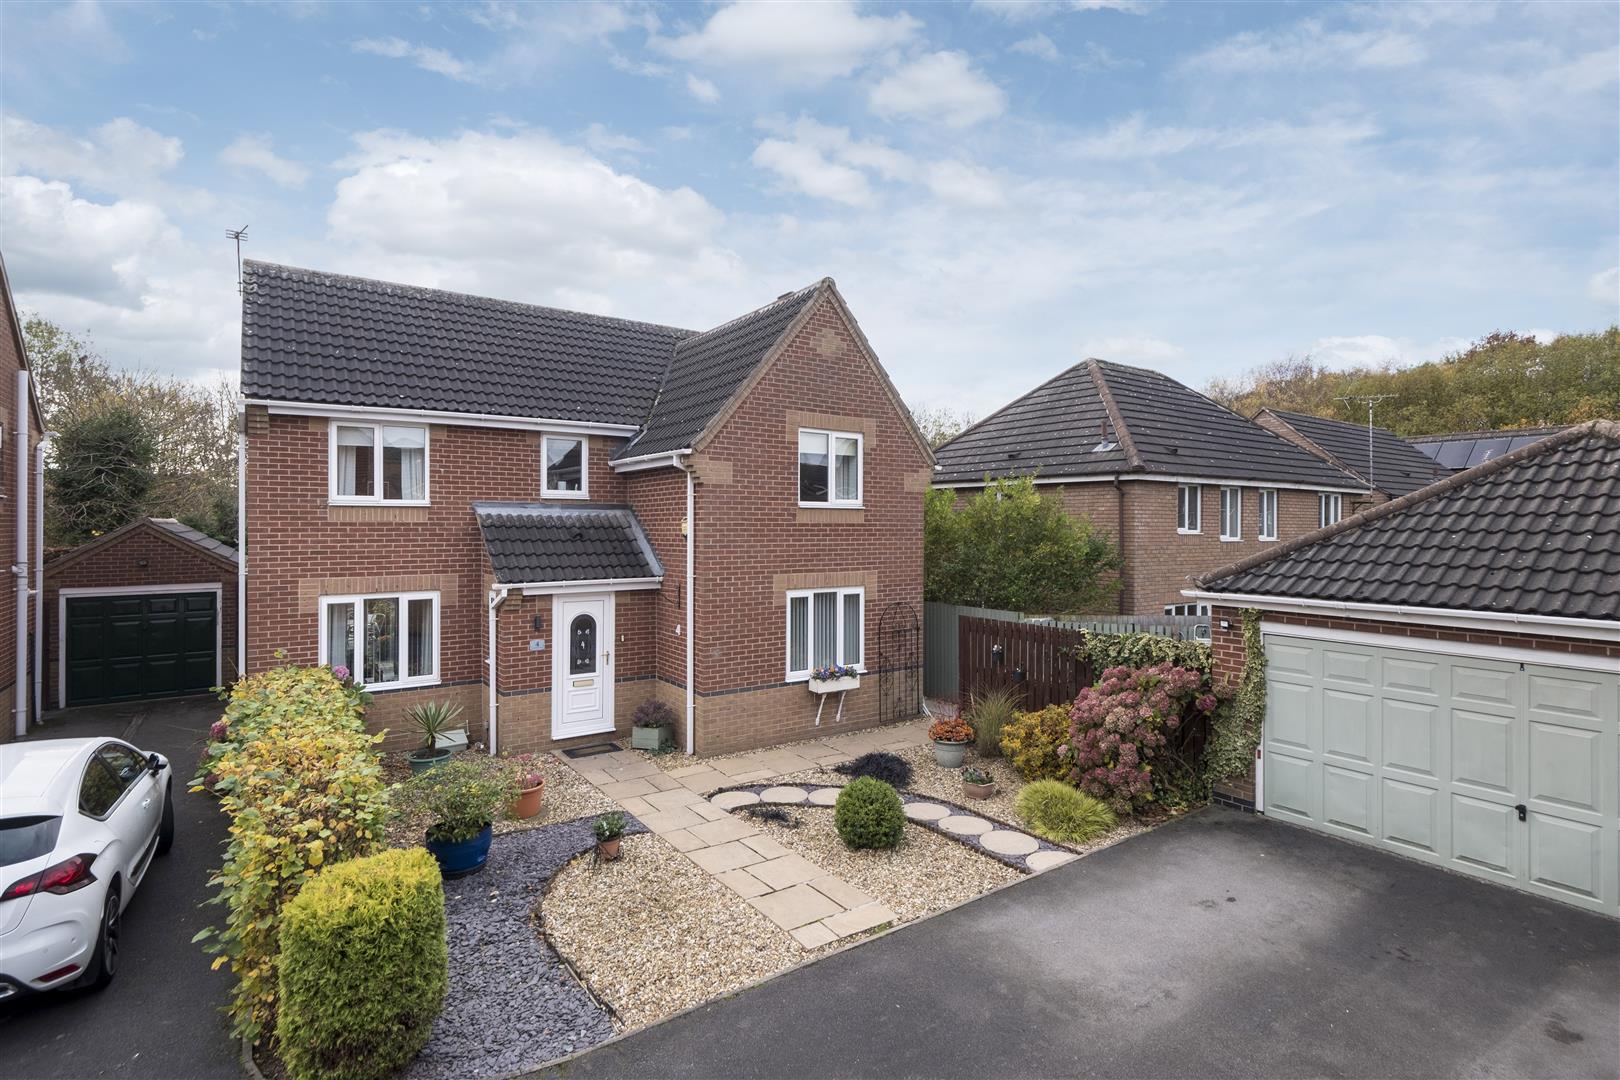 4 bedroom  Detached House for Sale in Winsford